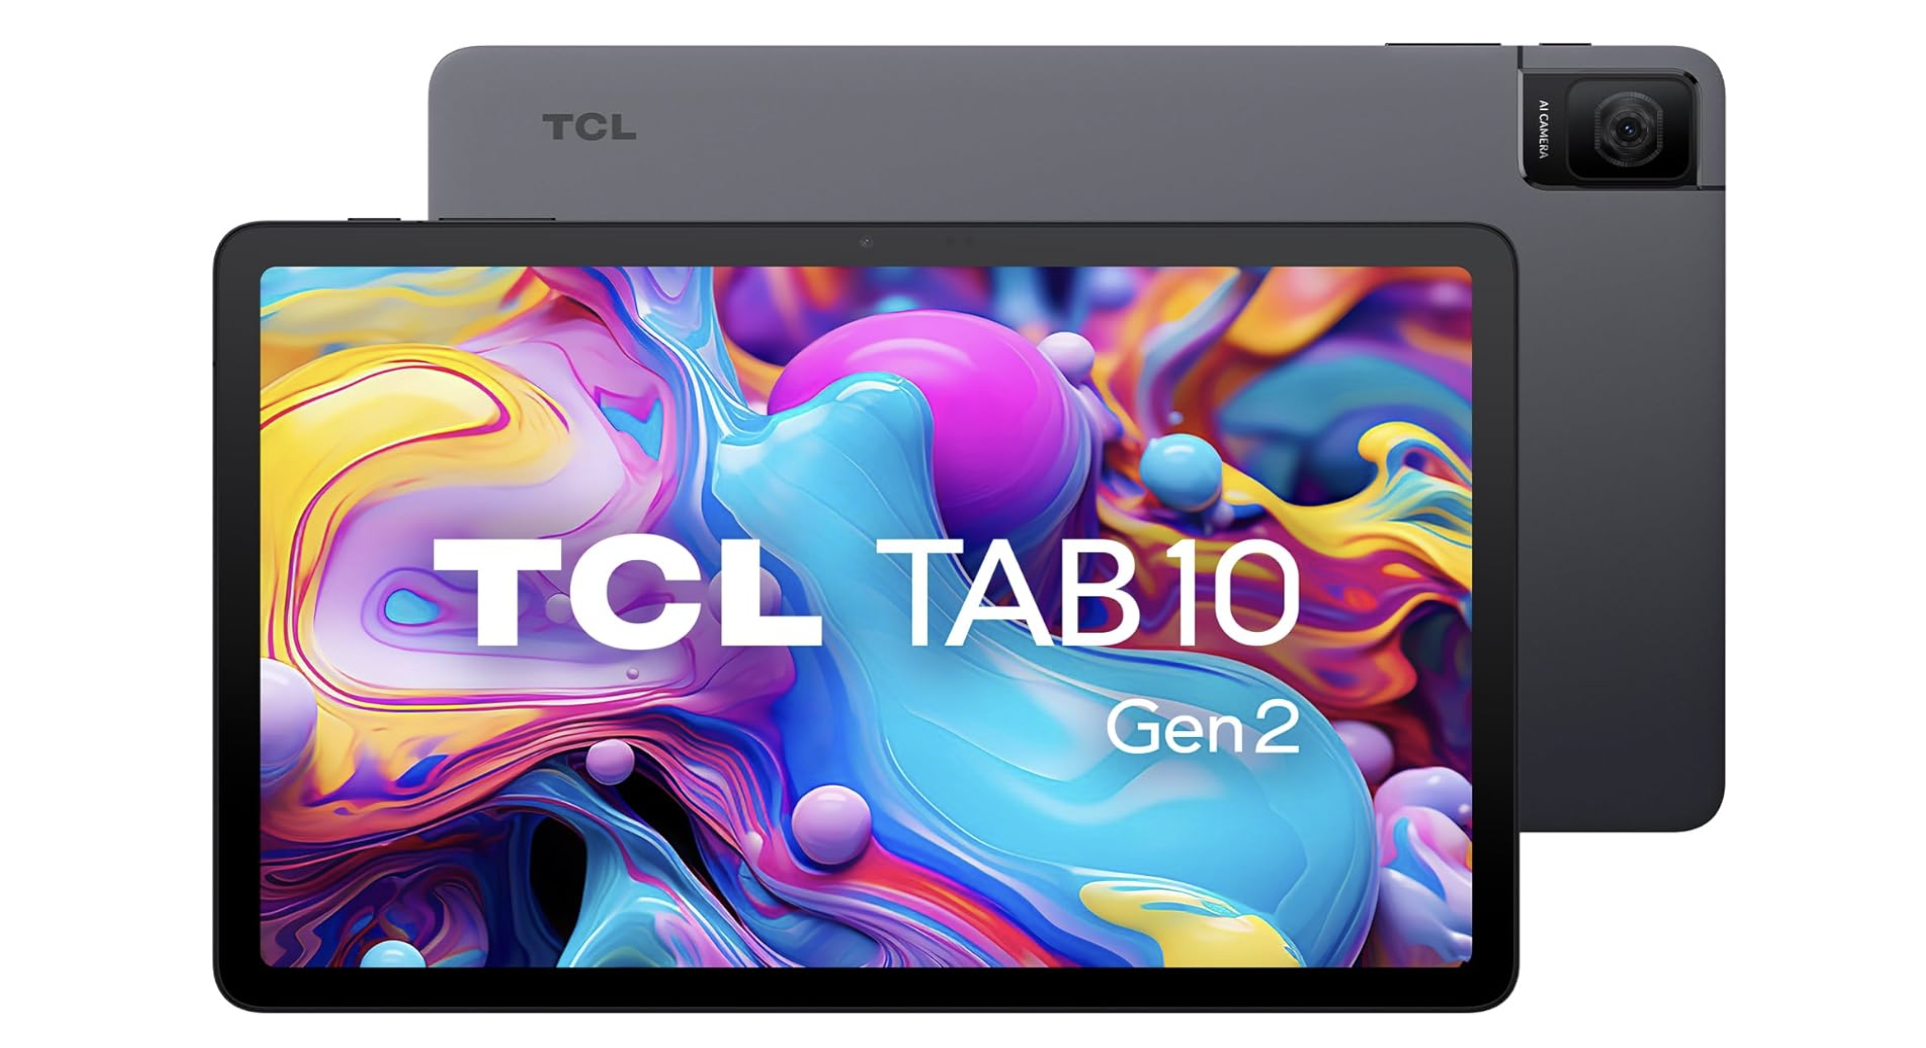 Get your Hands on TCL's New Tab 10 Gen 2 - Phandroid